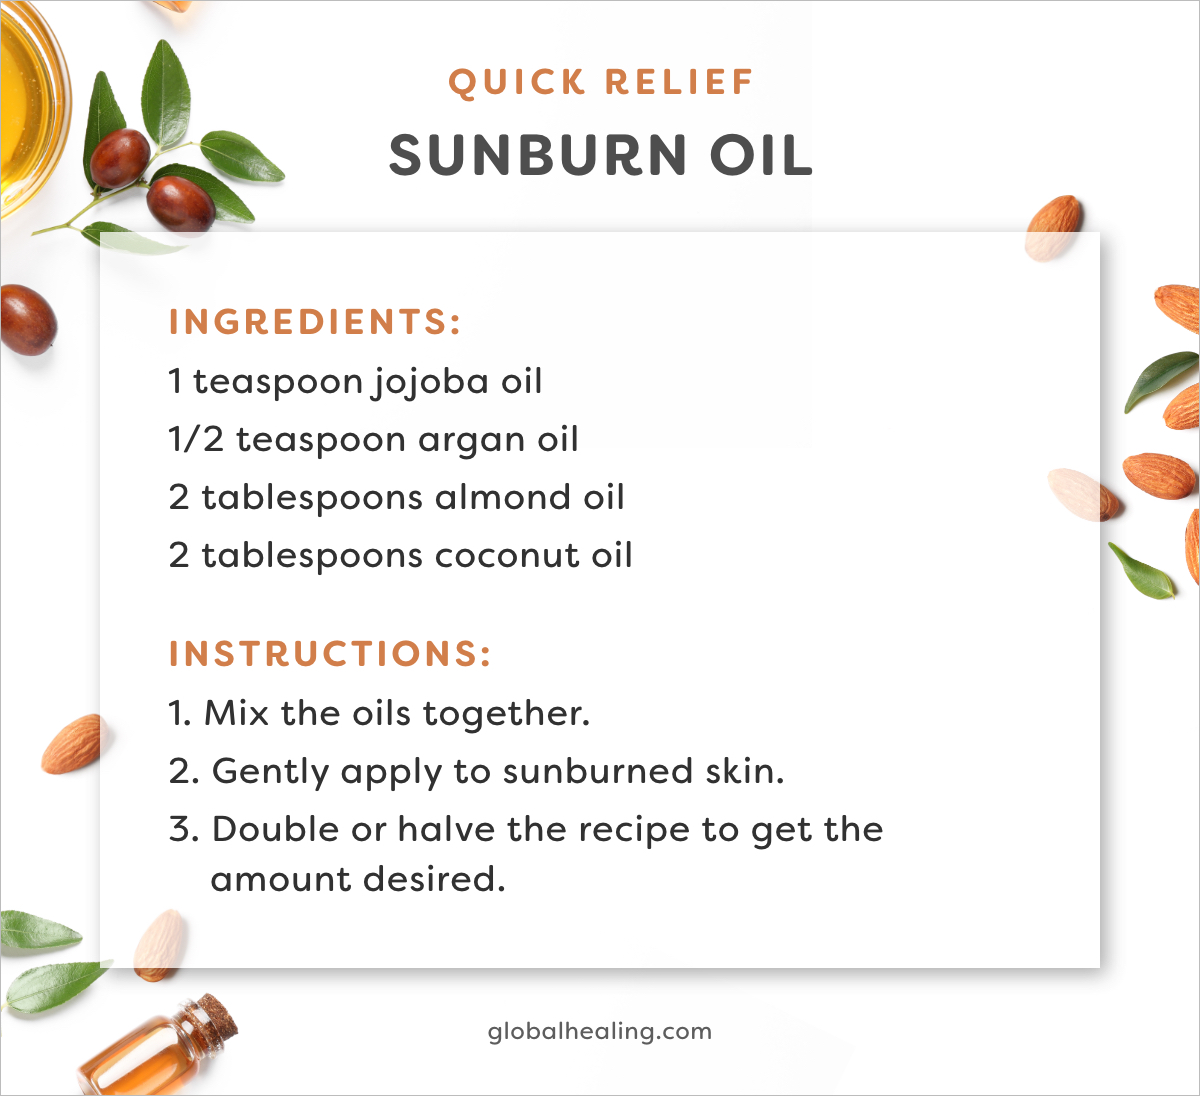 Try this quick relief sunburn oil recipe that'll soothe your skin quickly.